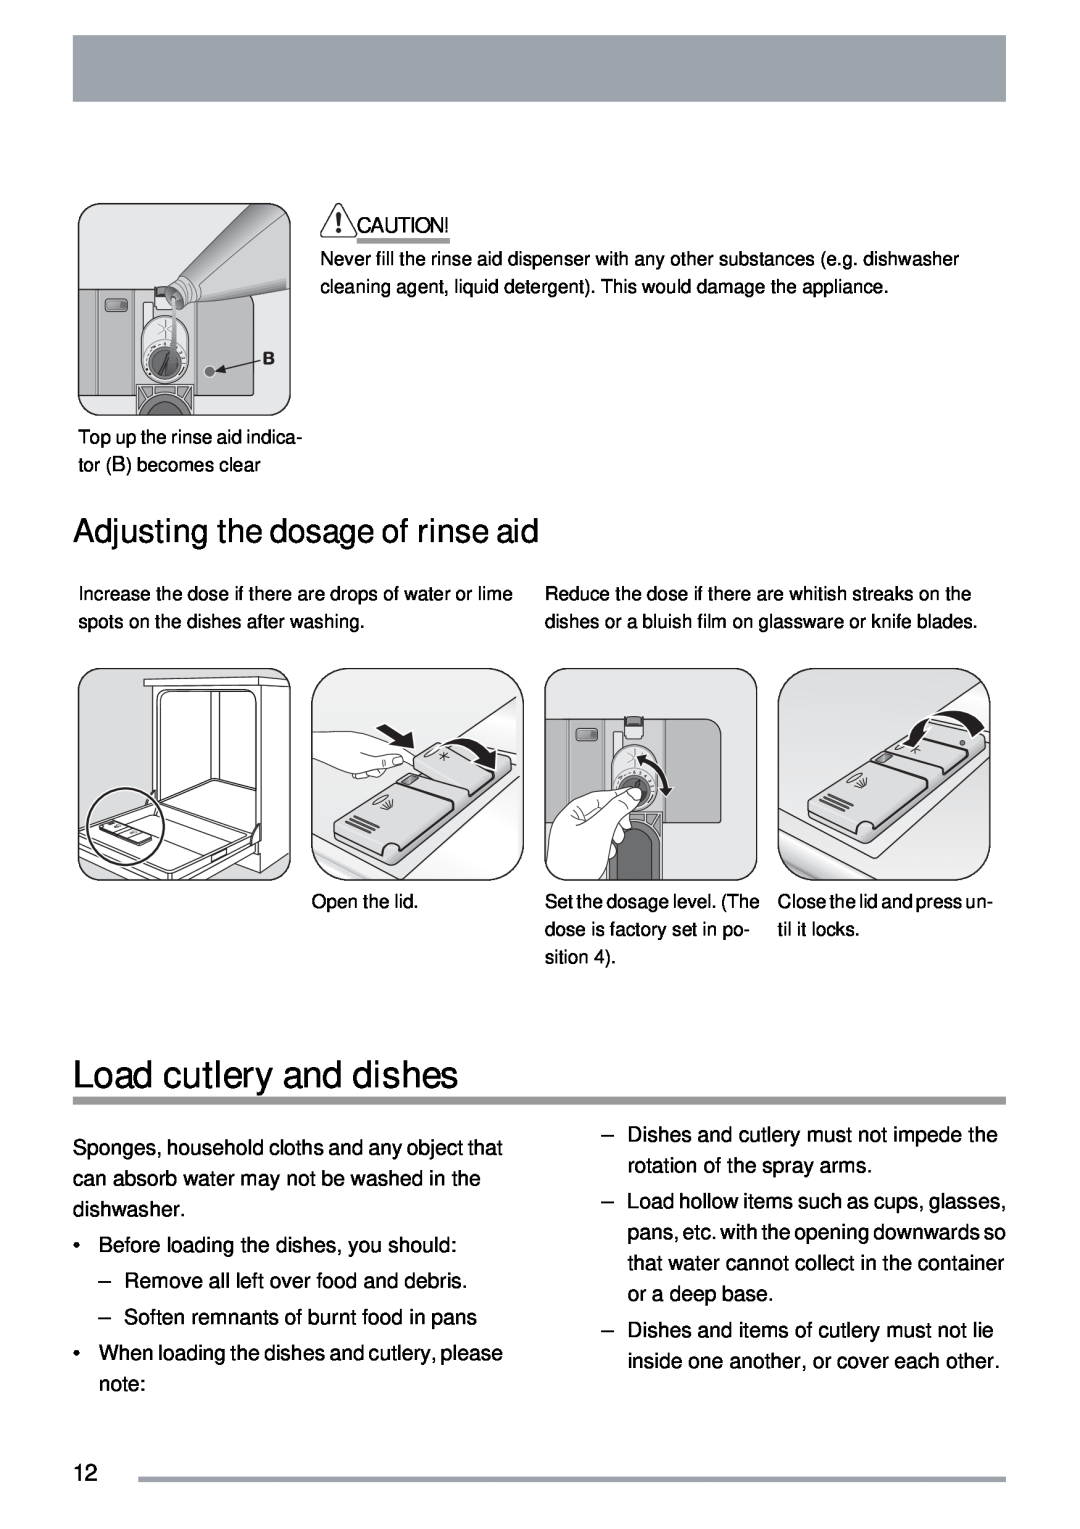 Zanussi ZDTS 101 user manual Load cutlery and dishes, Adjusting the dosage of rinse aid 